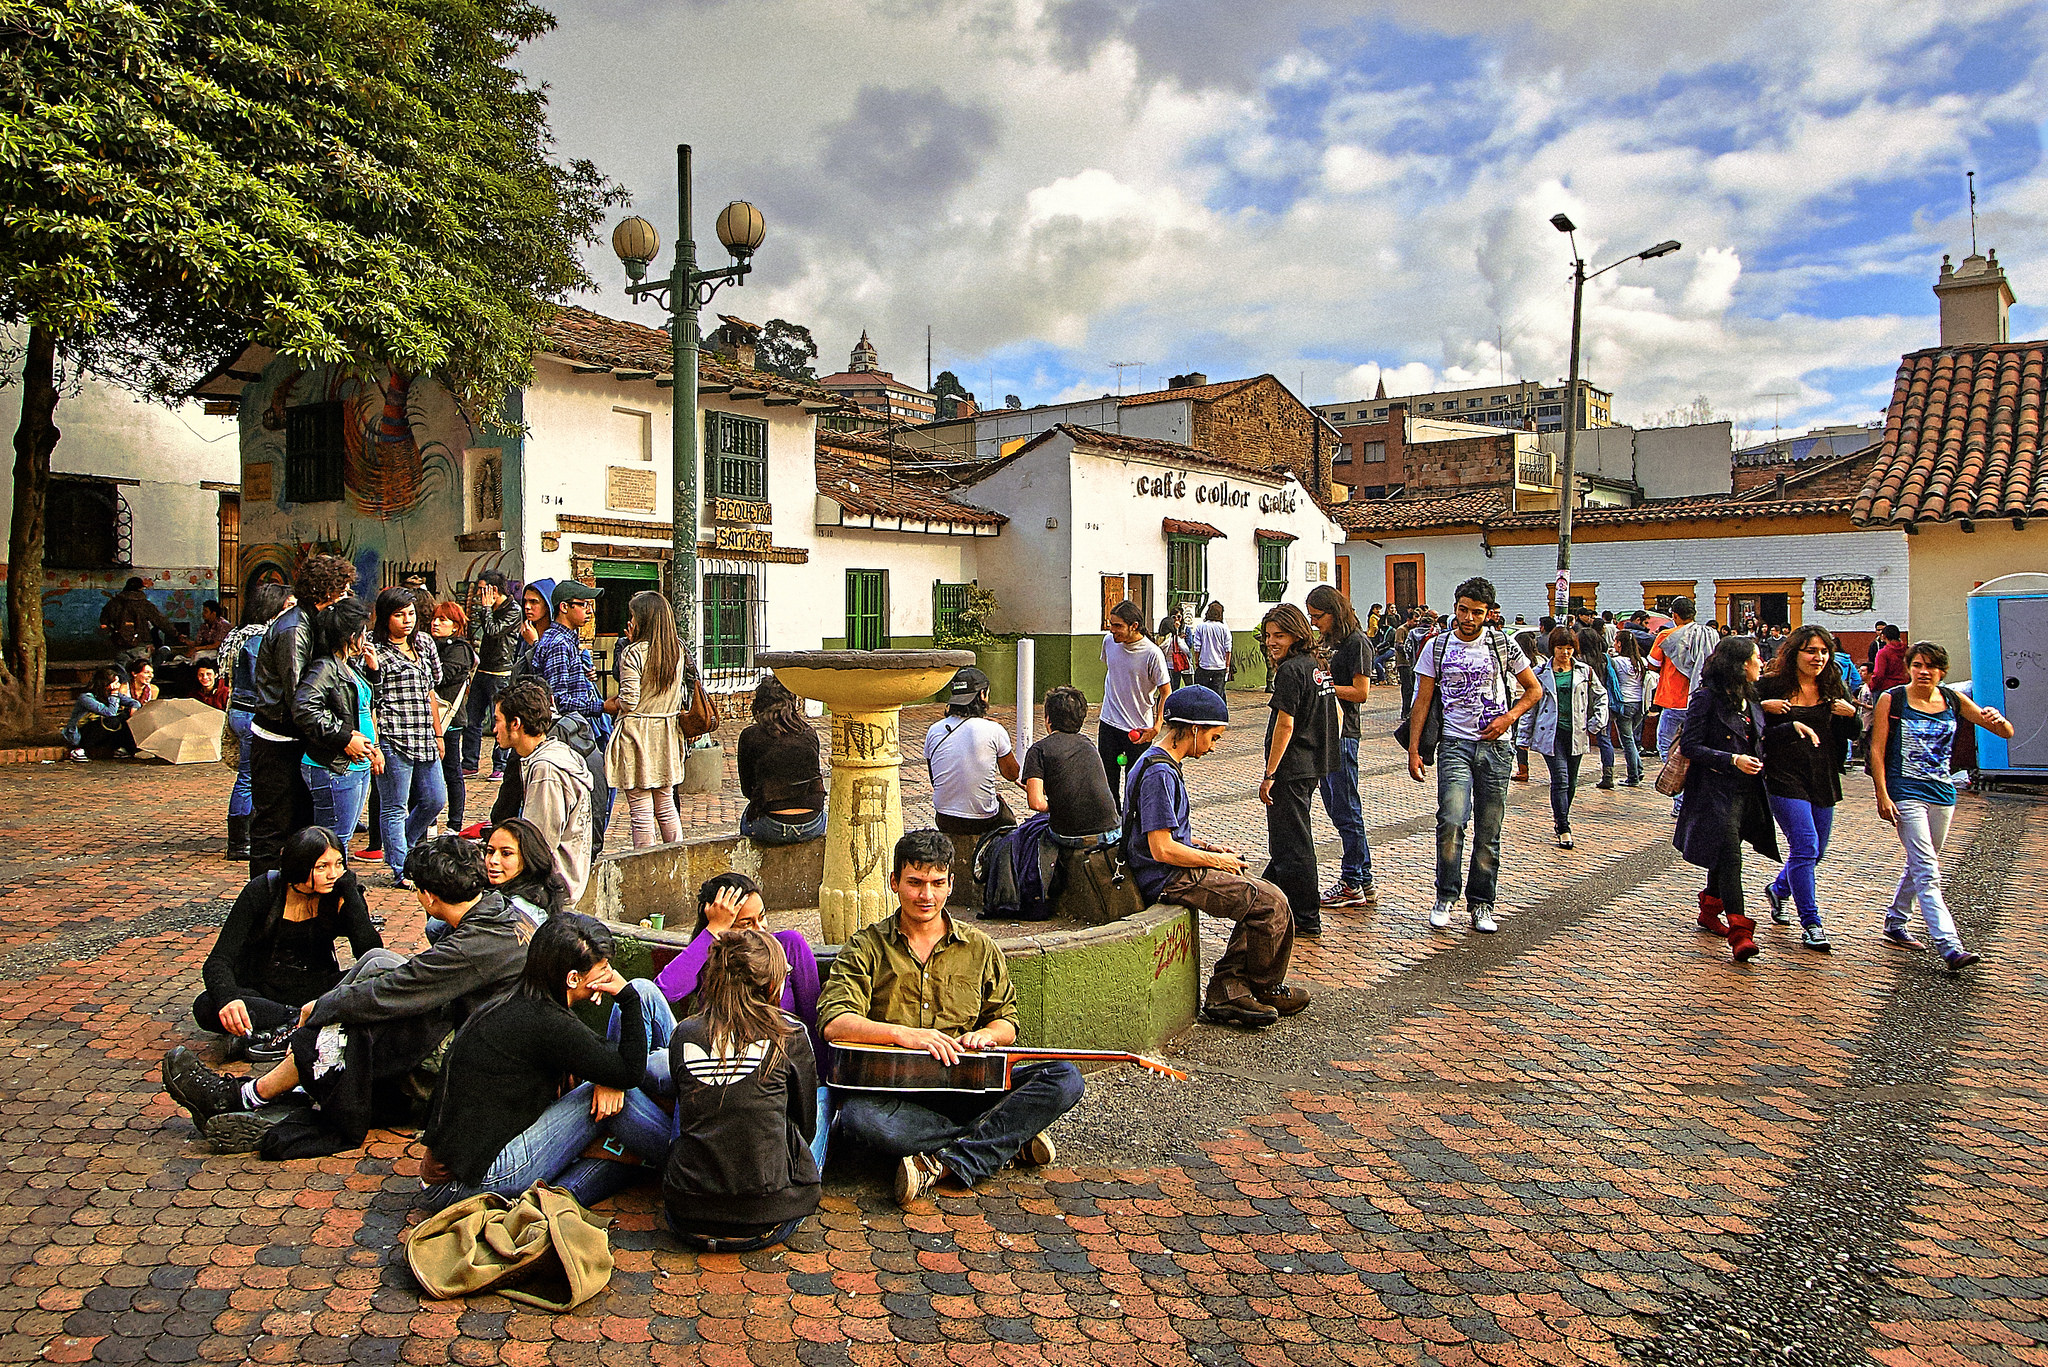 Wondering what to see when visiting Bogota?